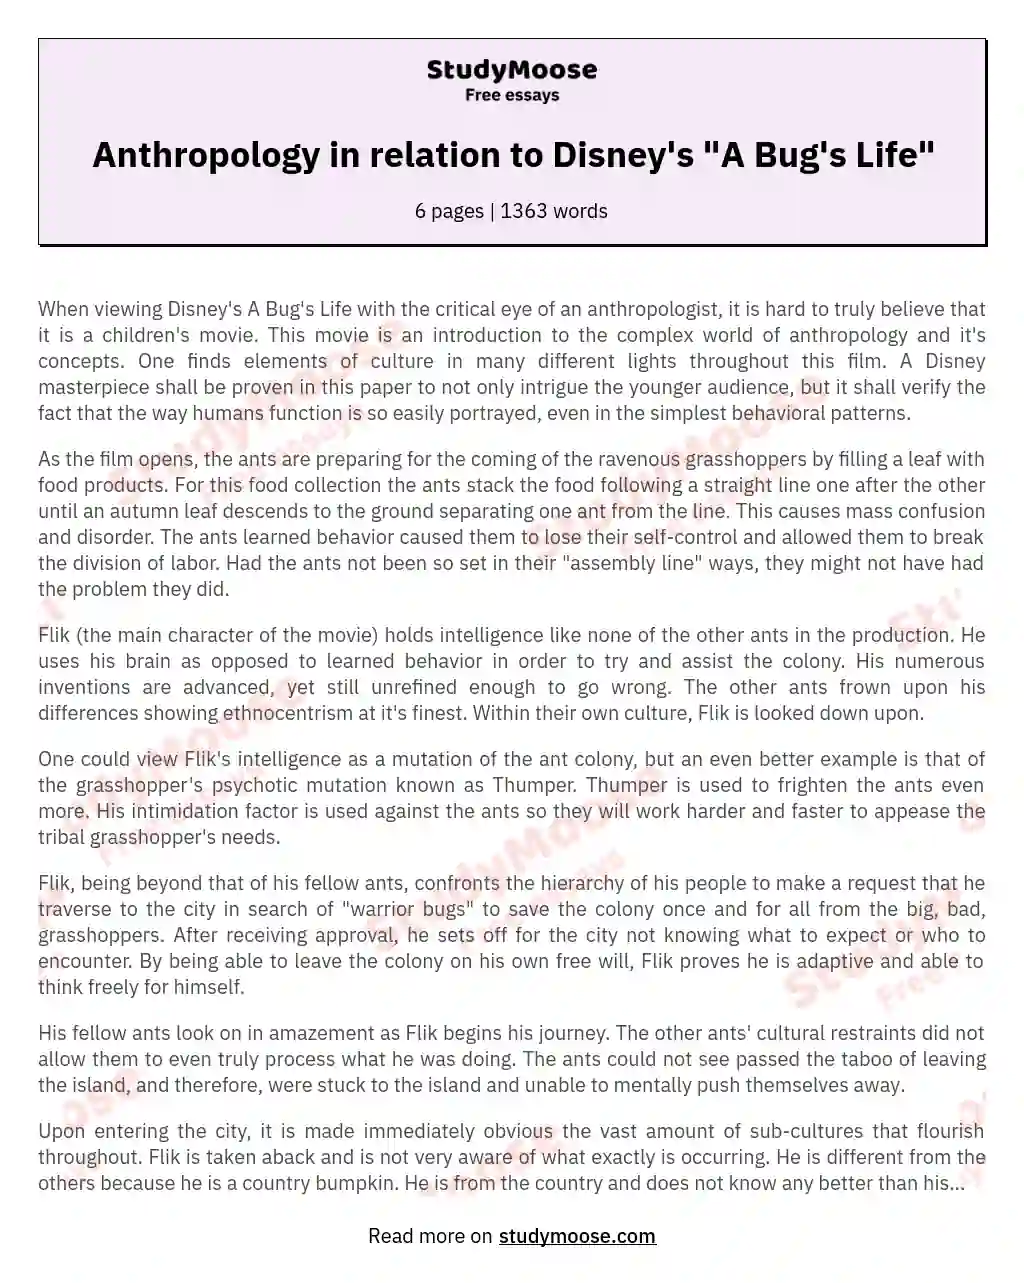 Anthropology in relation to Disney's "A Bug's Life" essay